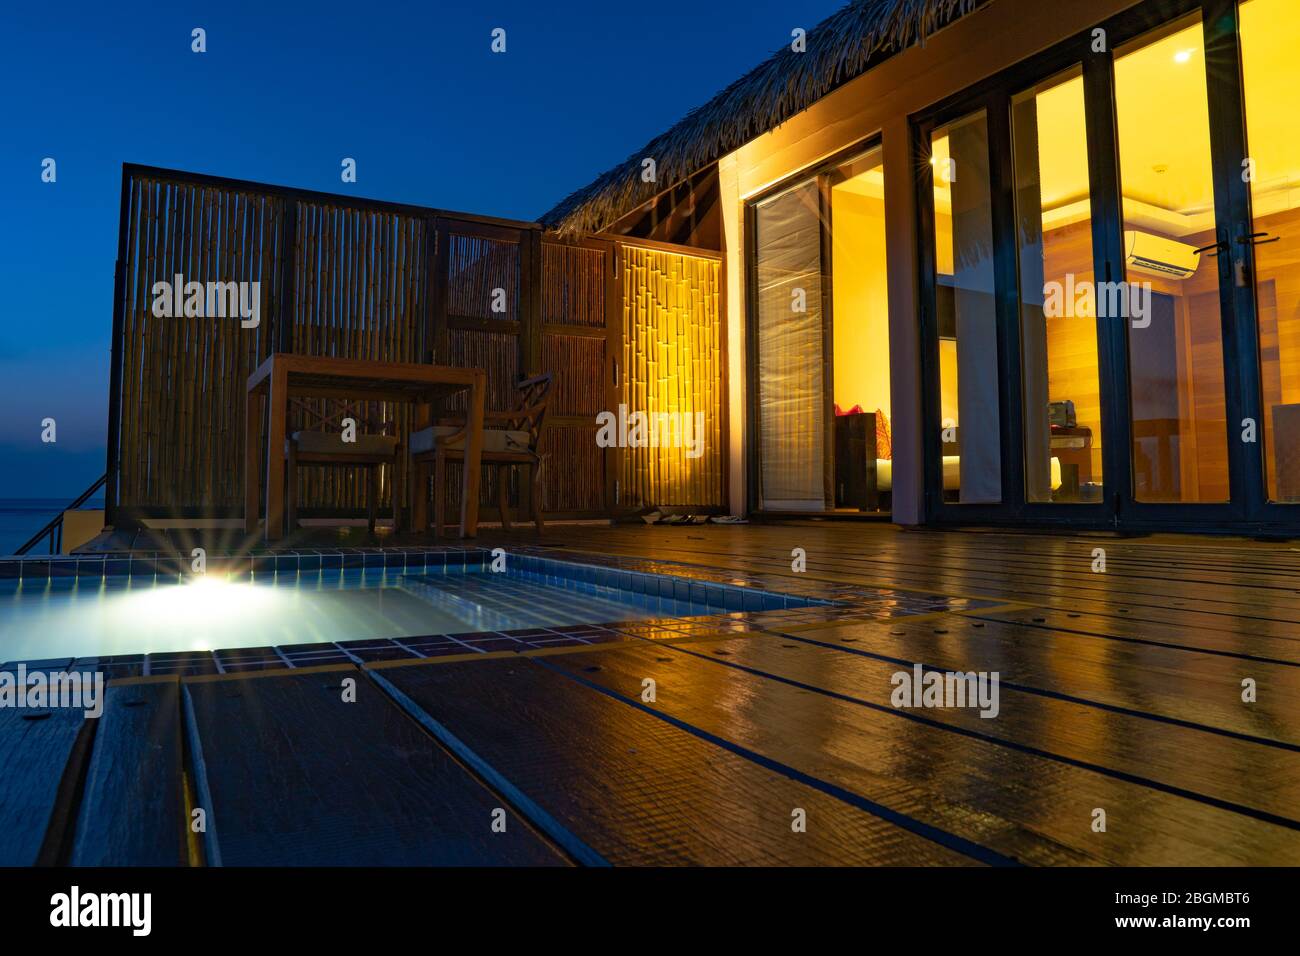 An evening by the pool. Stock Photo